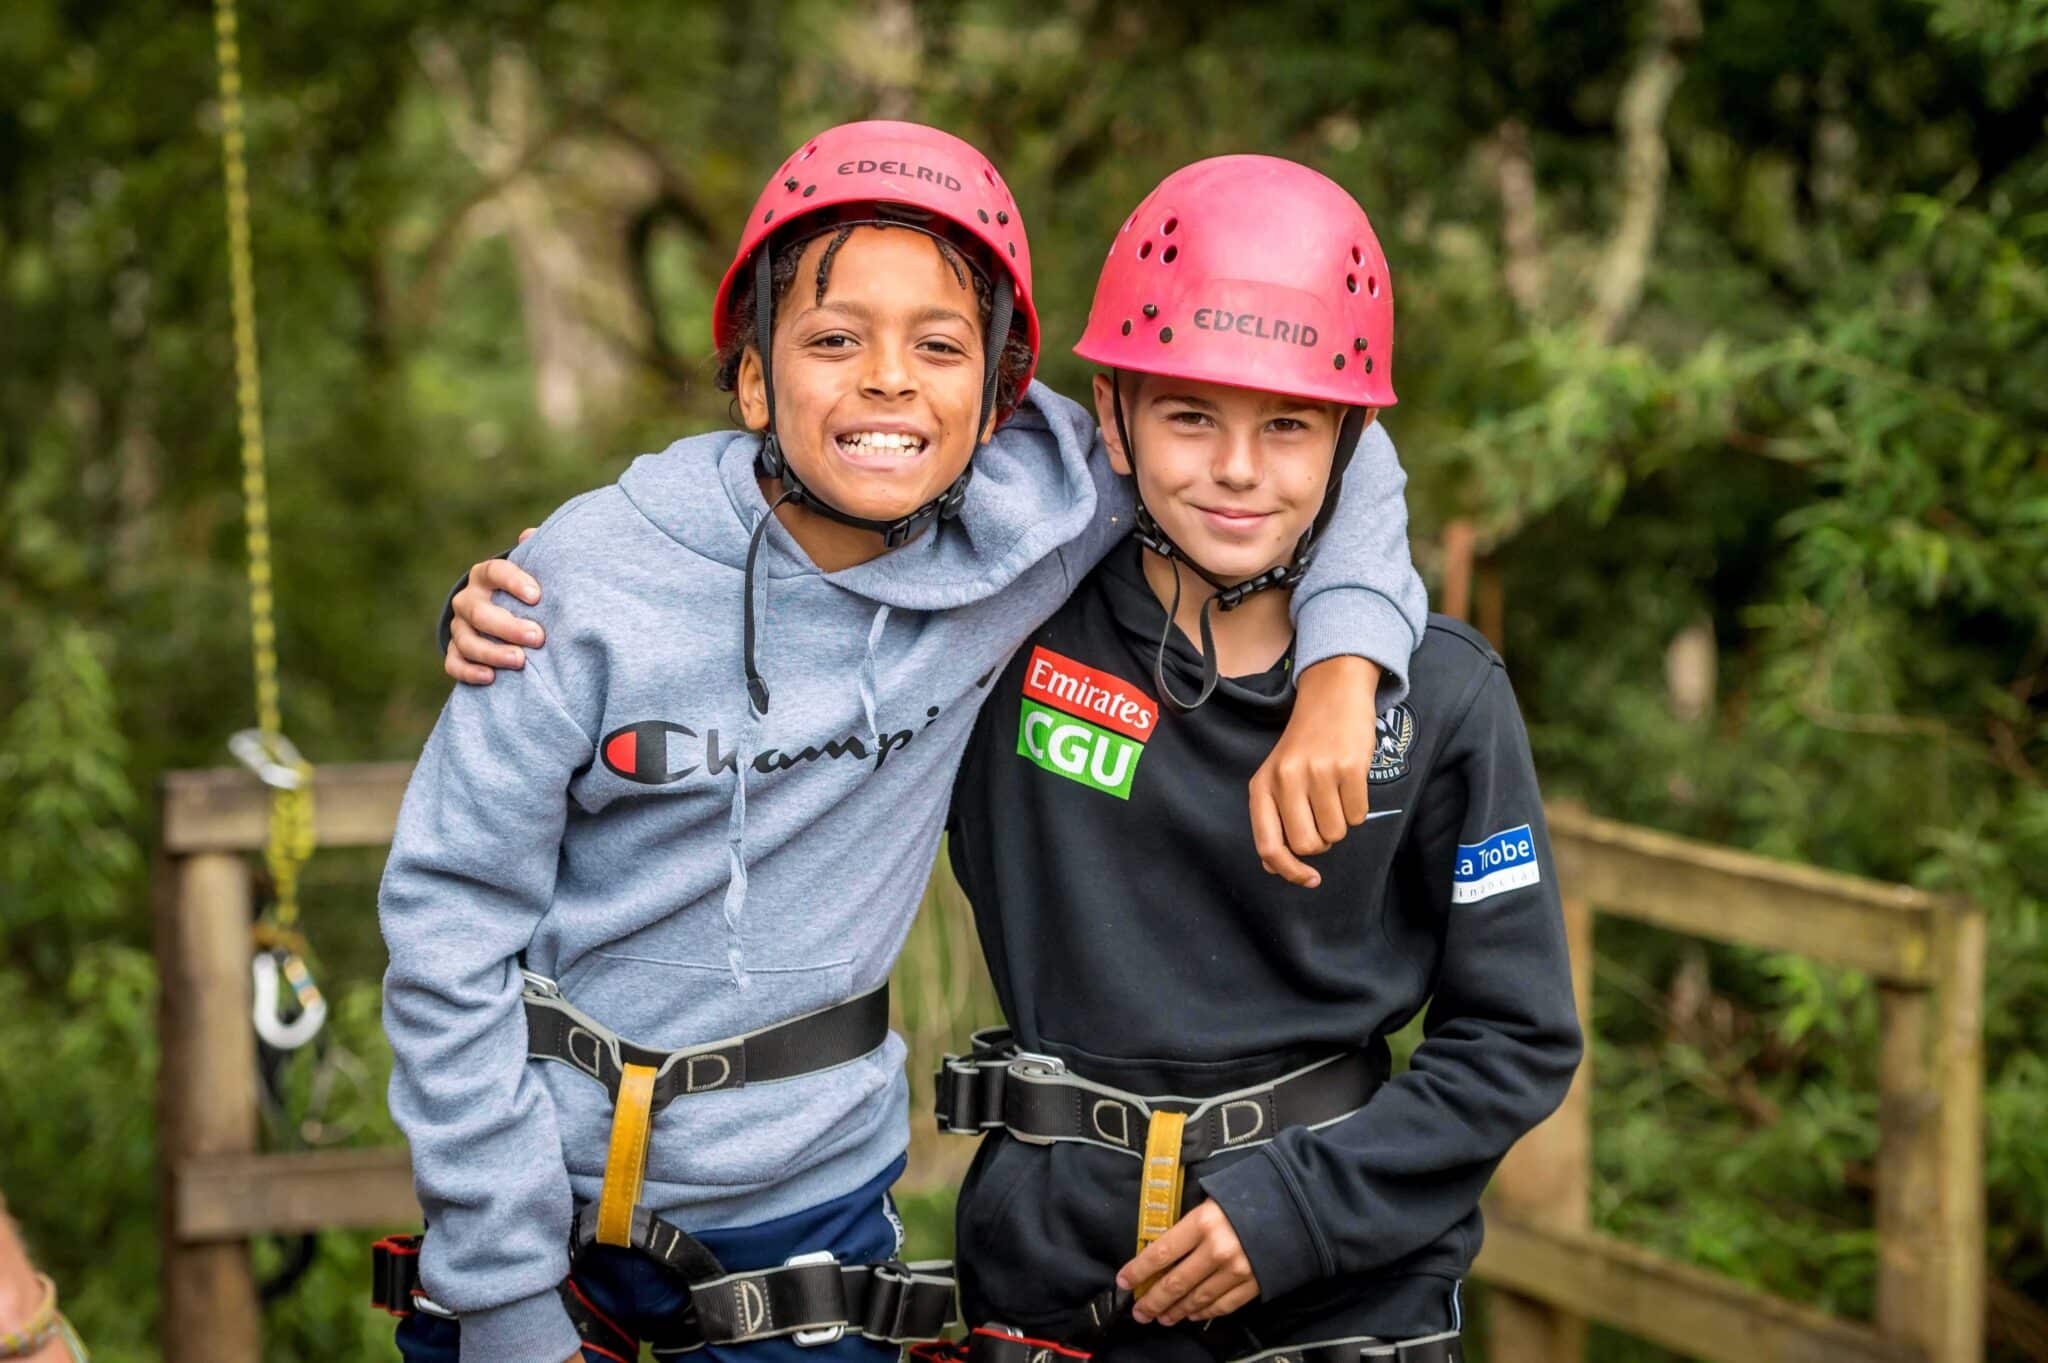 Two children wearing helmets and harnesses unite in an embrace, smiling as they stand outdoors in a wooded area.